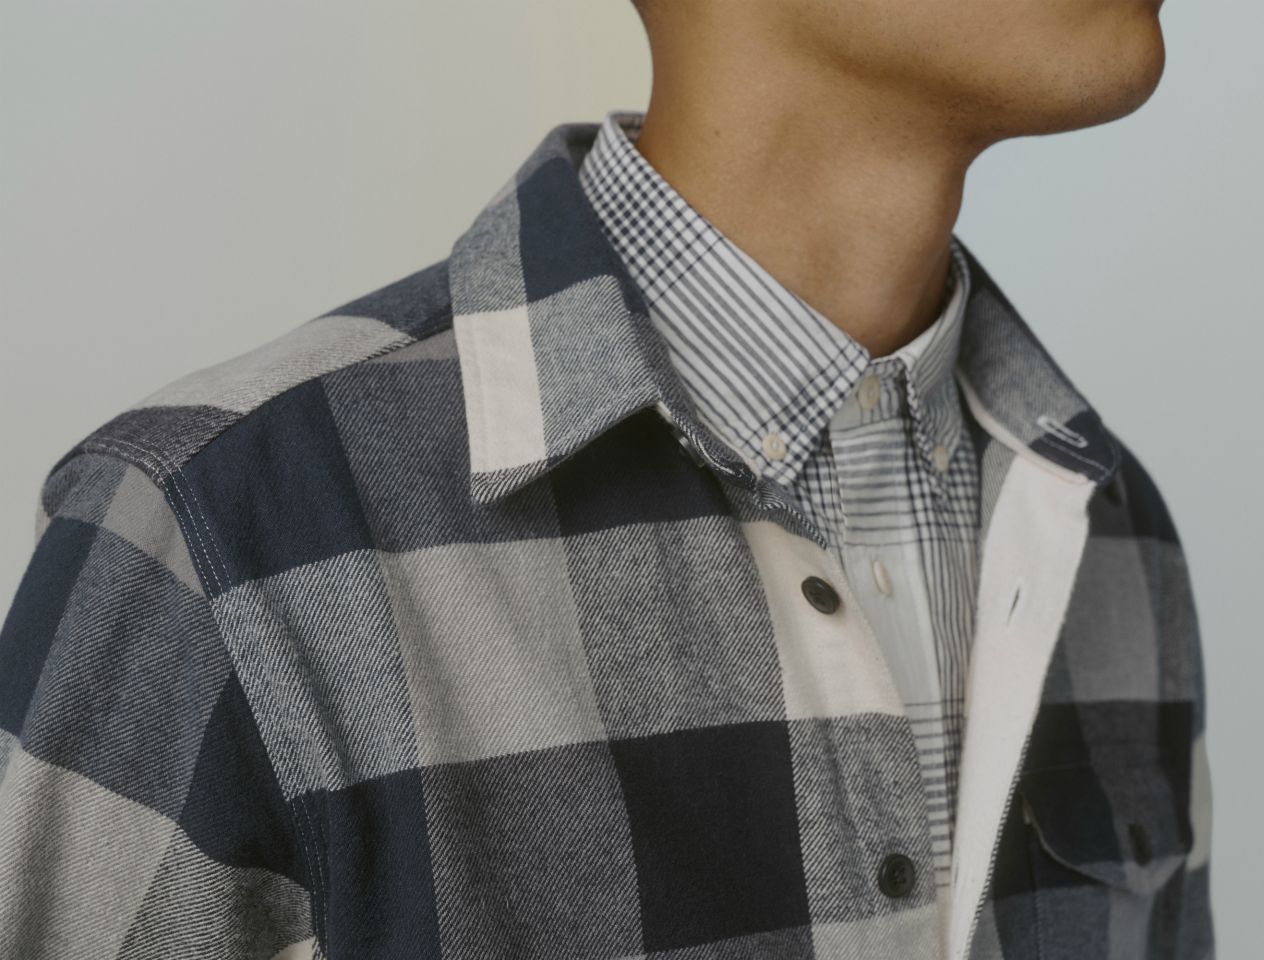 Model wearing two checked shirts